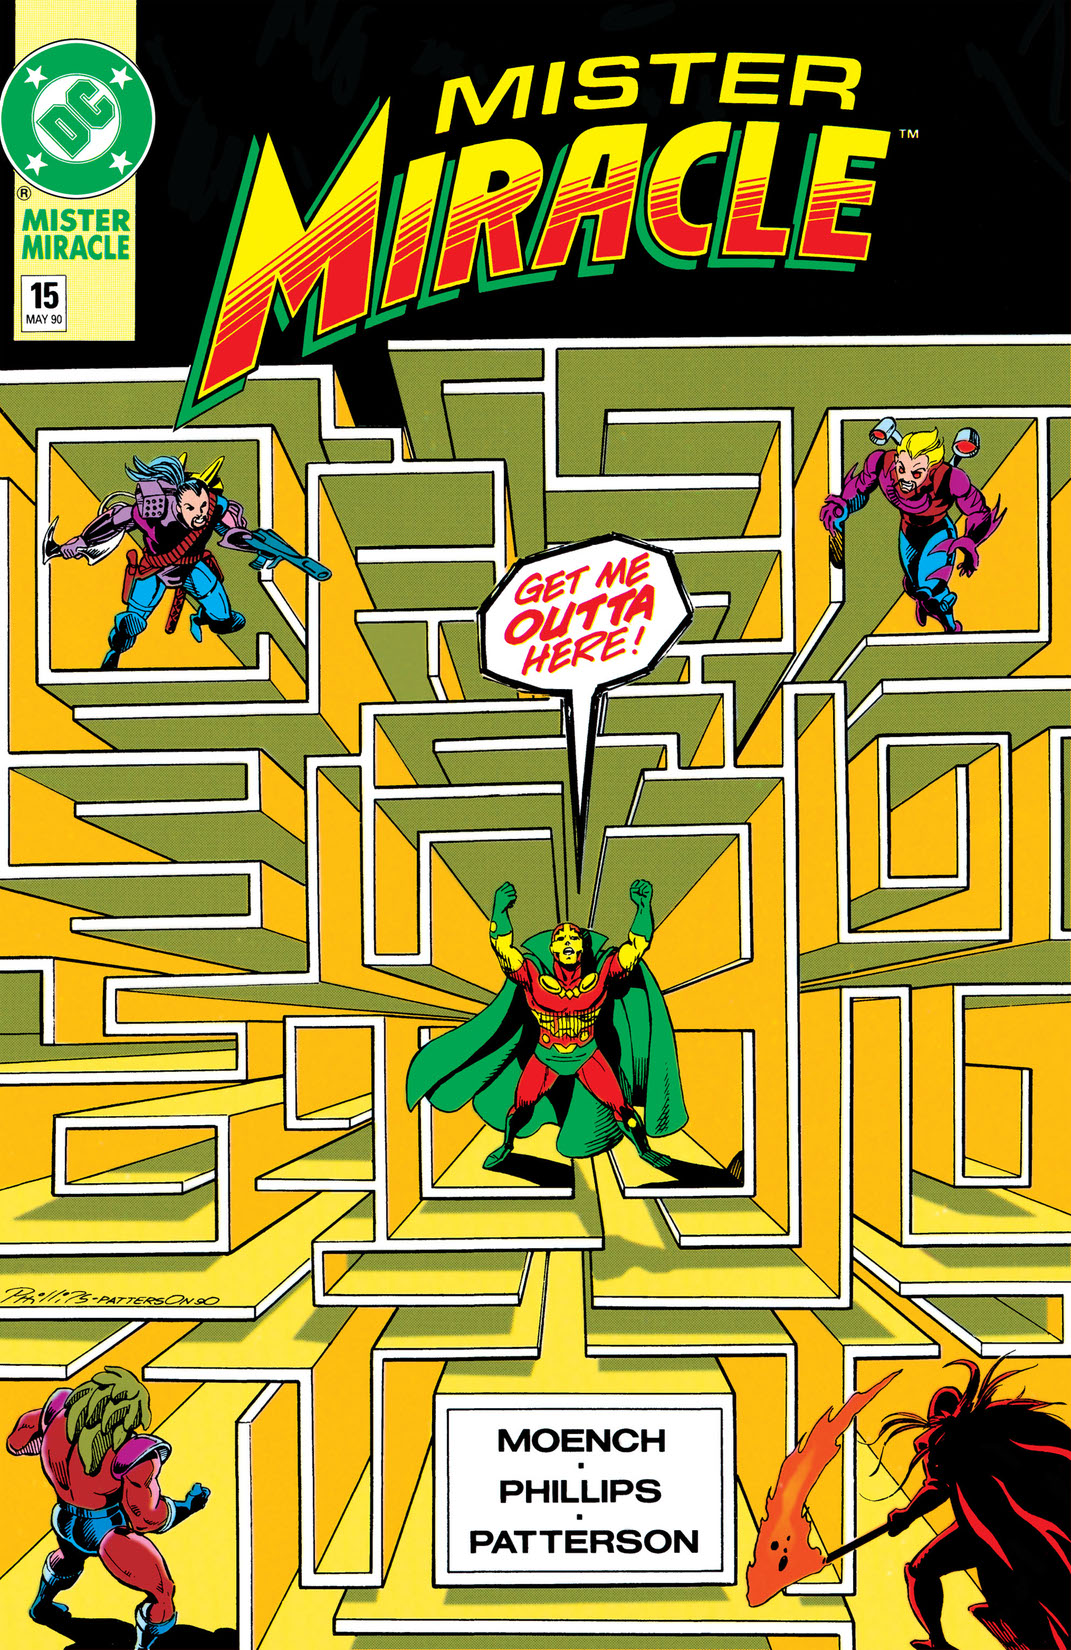 Mister Miracle (1988-) #15 preview images